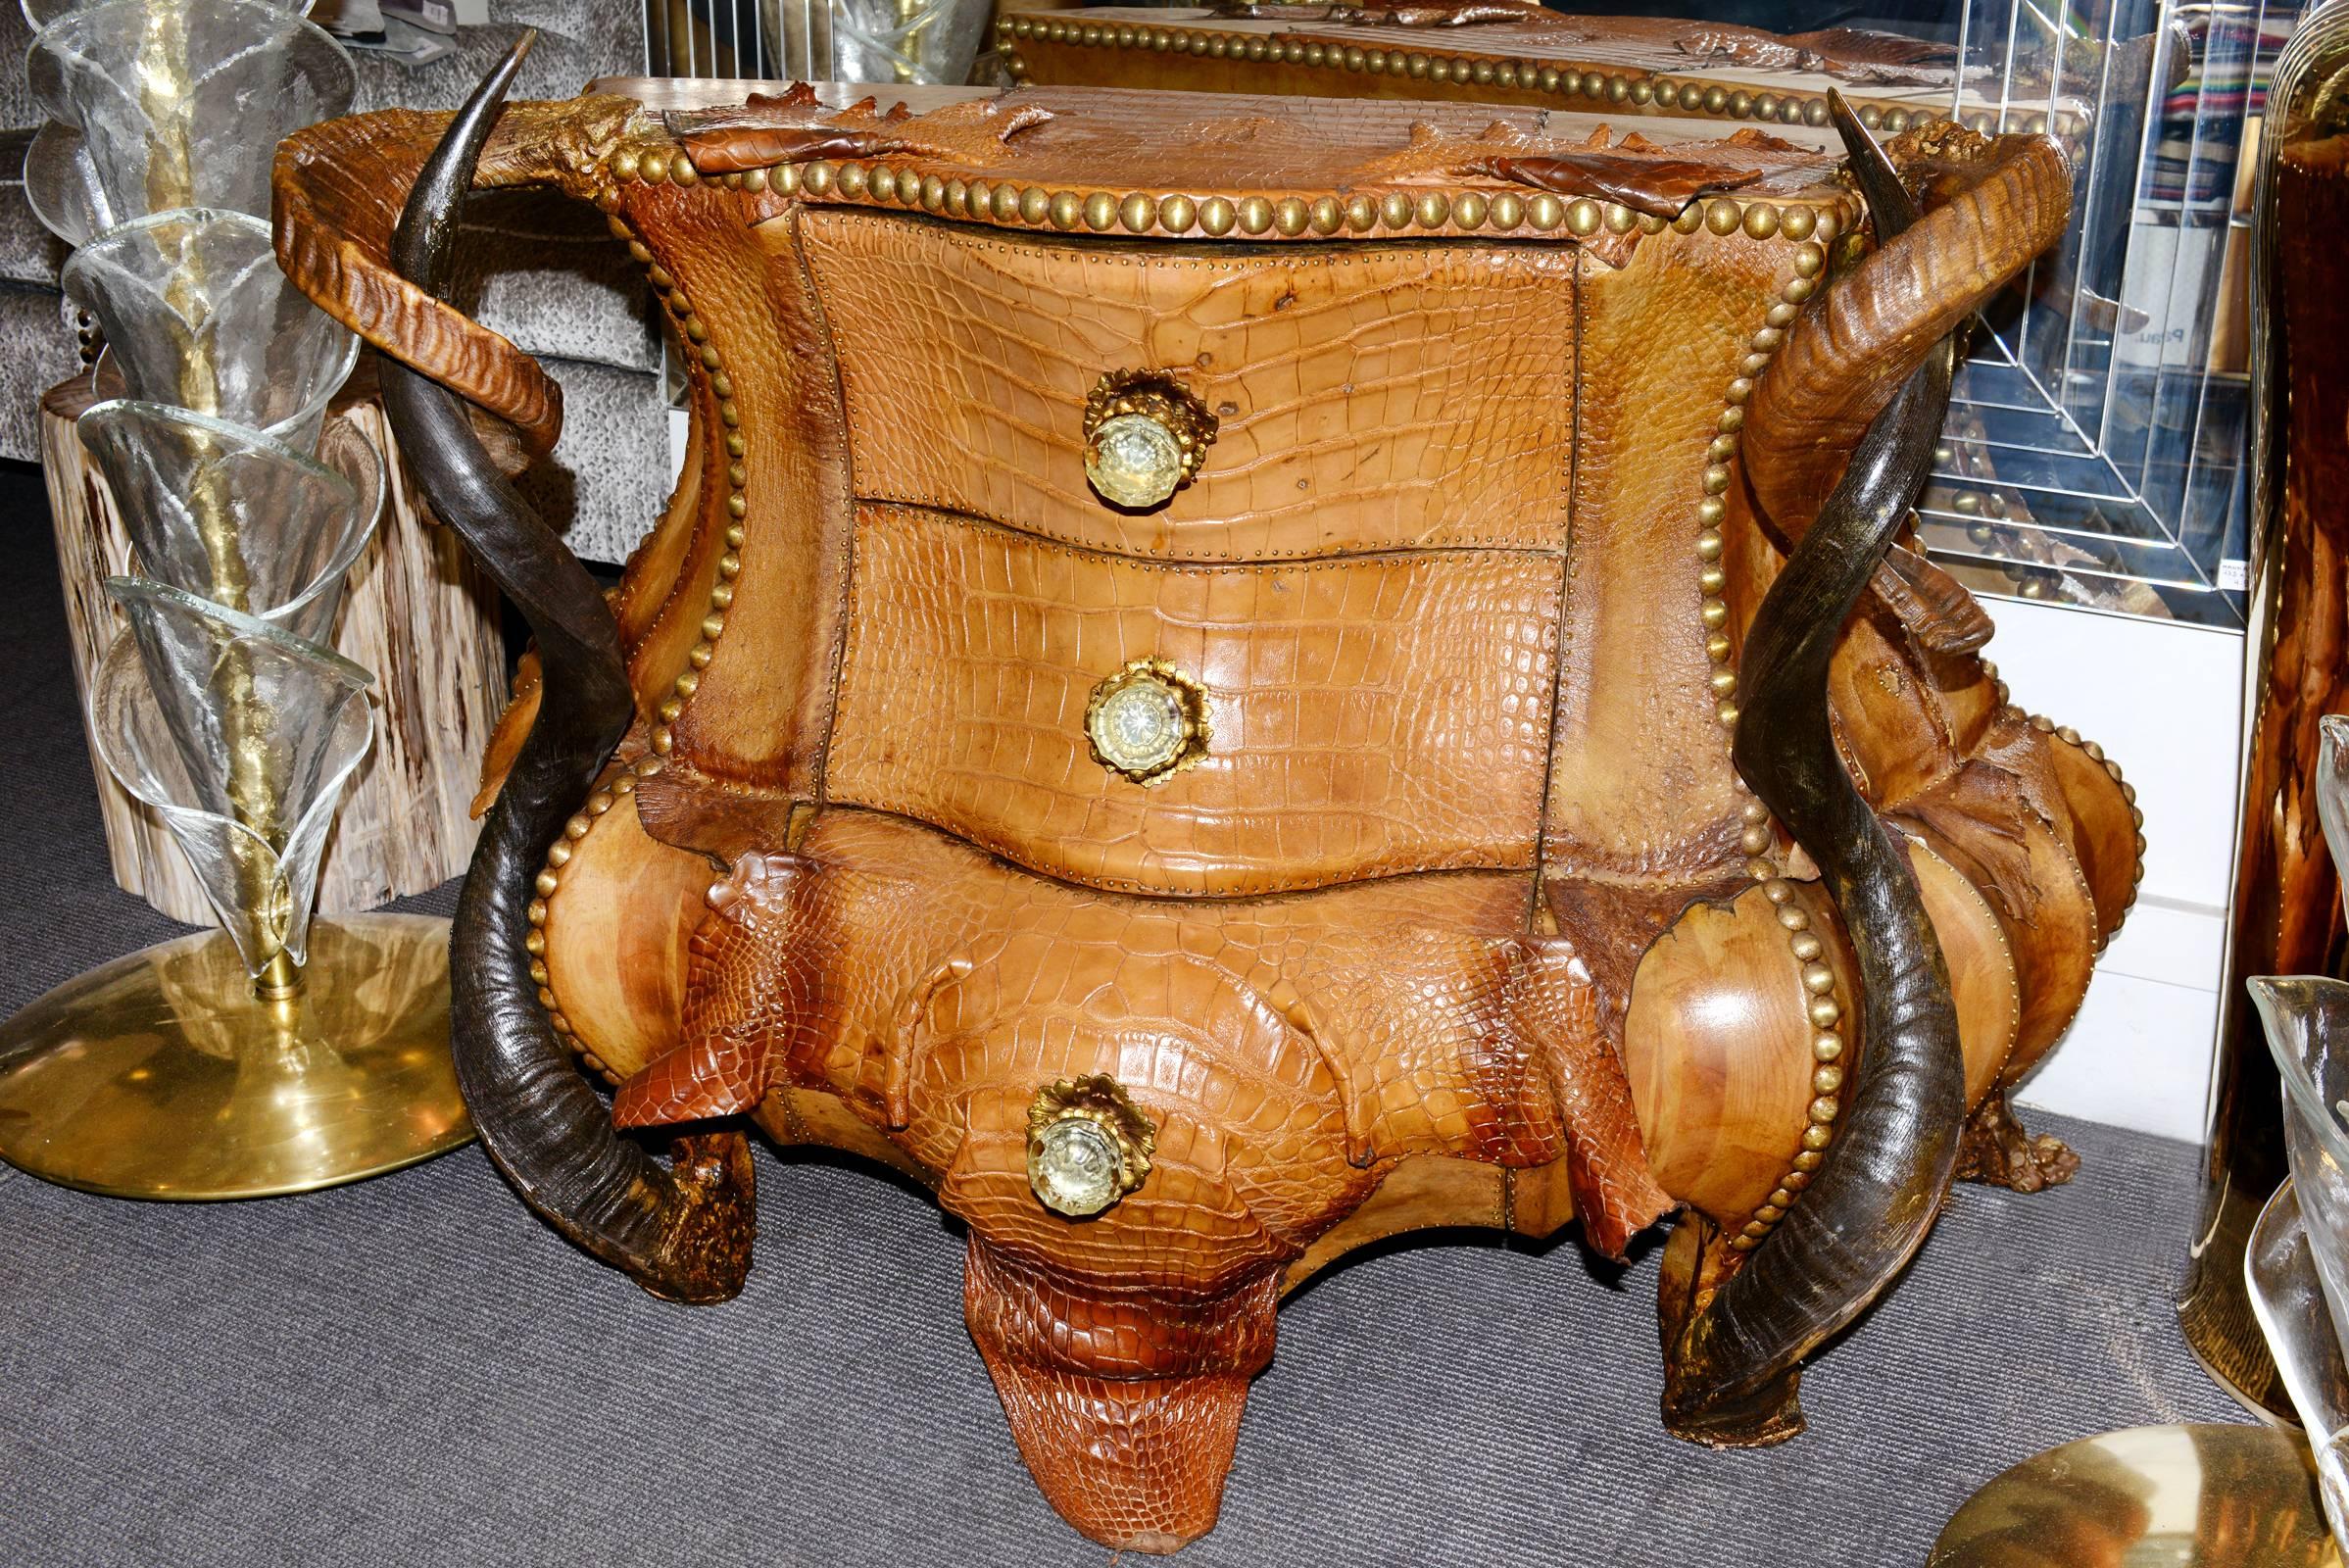 Chest of drawers horns and crocodile with
real kudu and Aries horns. Real crocodile skin.
Structure in noble wood and bronze finishes.
Exceptional piece.
